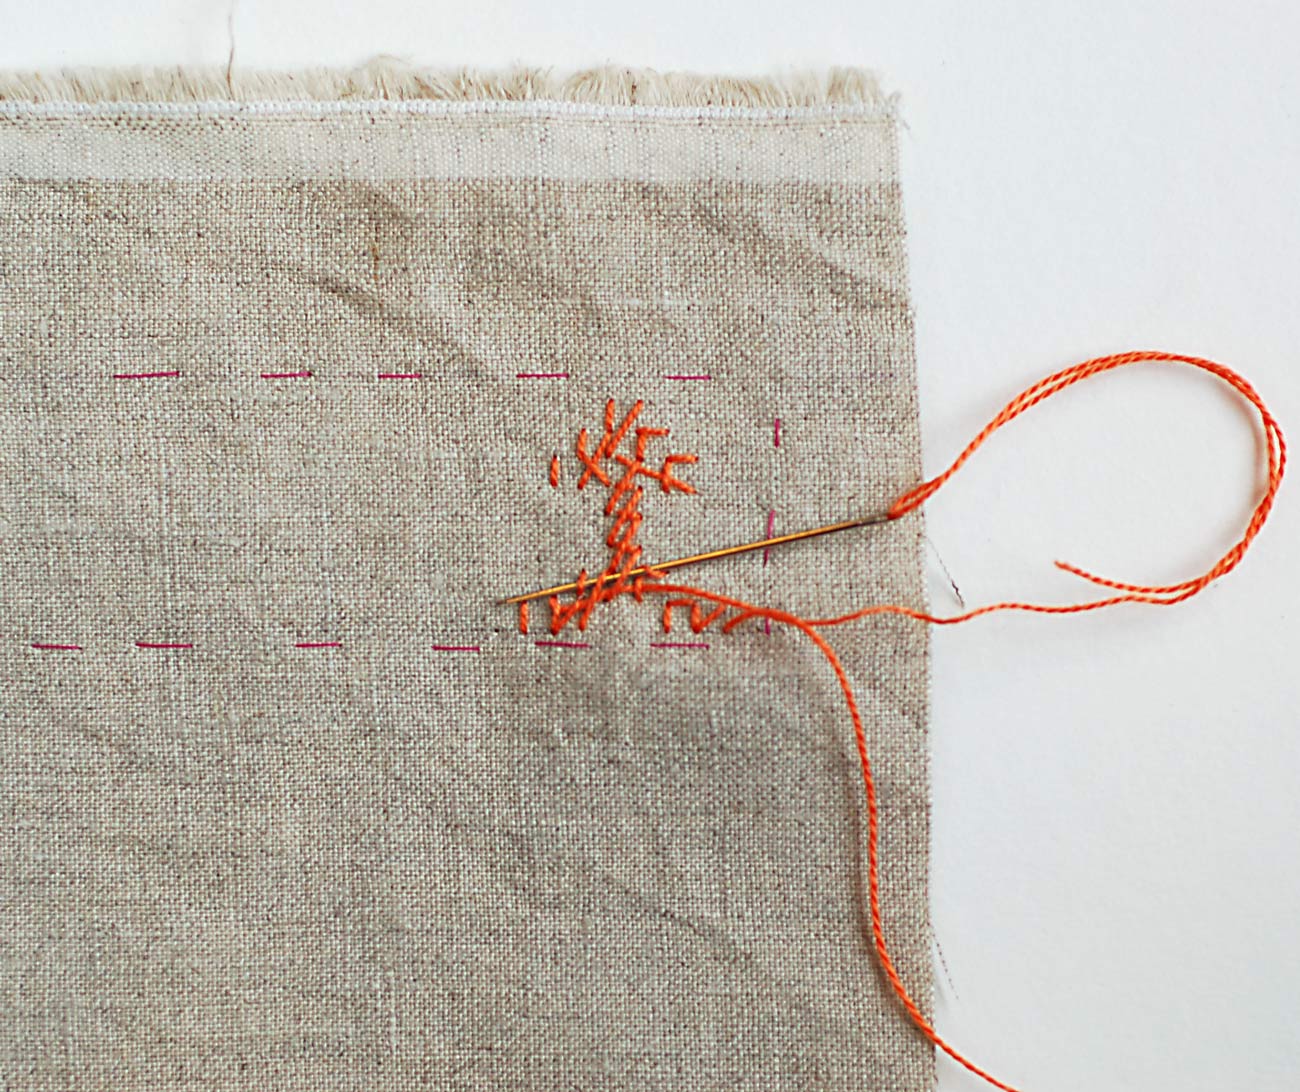 Tutorial - How to Cross Stitch with Waste Canvas 